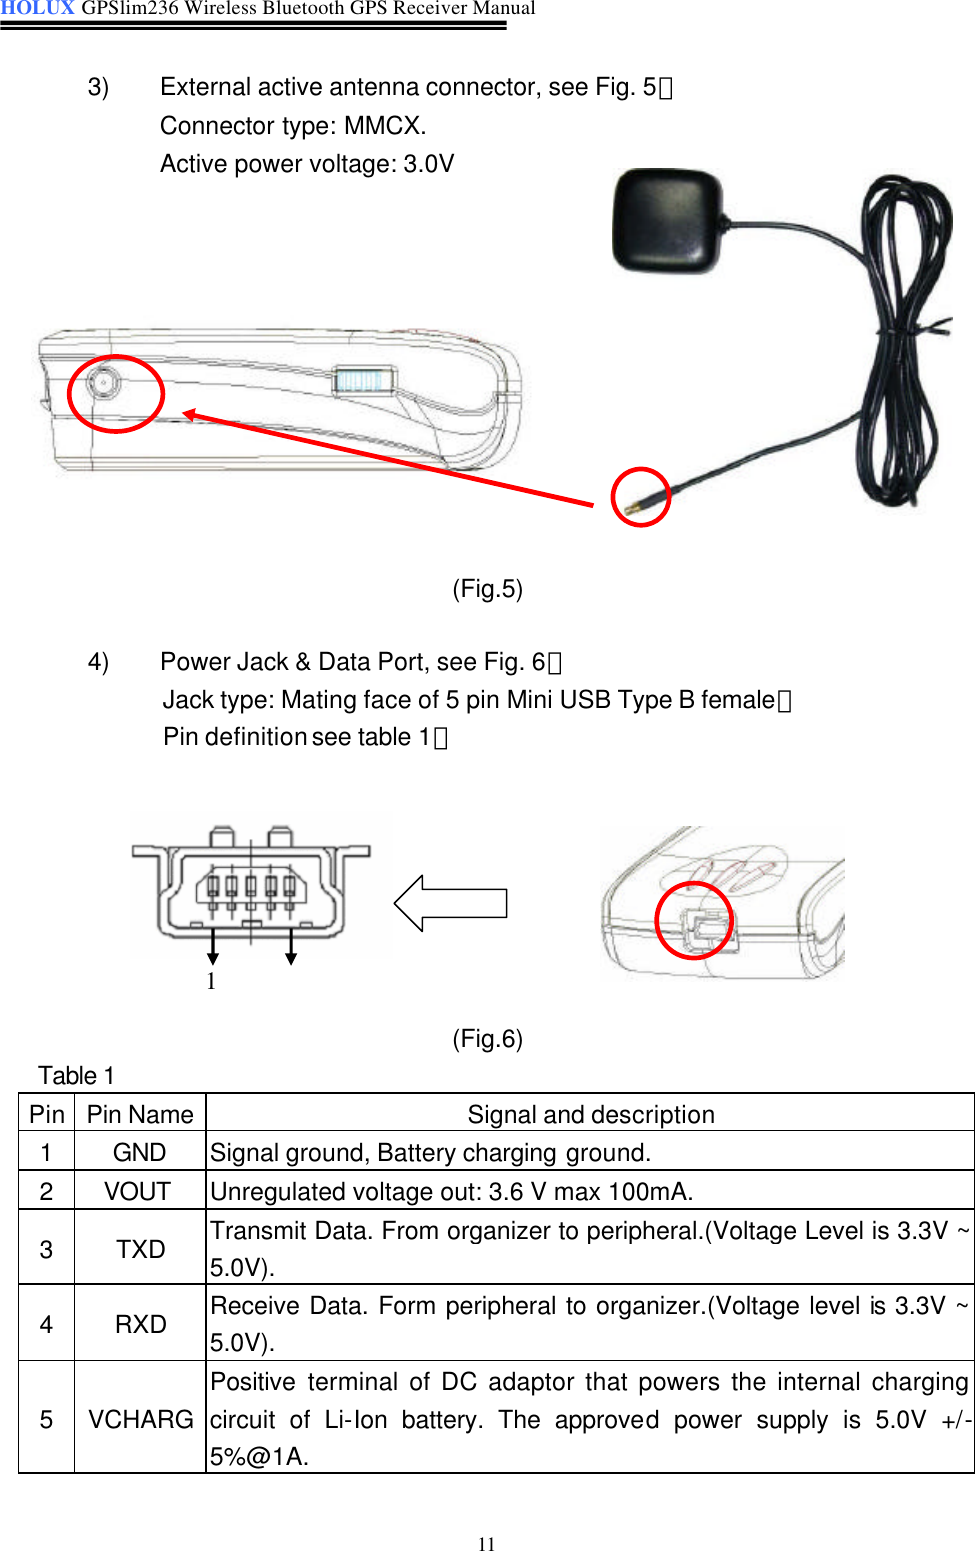 HOLUX GPSlim236 Wireless Bluetooth GPS Receiver Manual   11  1     3) External active antenna connector, see Fig. 5。 Connector type: MMCX. Active power voltage: 3.0V        (Fig.5)  4) Power Jack &amp; Data Port, see Fig. 6。 Jack type: Mating face of 5 pin Mini USB Type B female。 Pin definition see table 1。        (Fig.6)  Table 1 Pin Pin Name Signal and description 1 GND Signal ground, Battery charging ground. 2 VOUT Unregulated voltage out: 3.6 V max 100mA. 3 TXD Transmit Data. From organizer to peripheral.(Voltage Level is 3.3V ~ 5.0V). 4 RXD Receive Data. Form peripheral to organizer.(Voltage level is 3.3V ~ 5.0V).  5  VCHARG Positive terminal of DC adaptor that powers the internal charging circuit of Li-Ion battery. The approved power supply is 5.0V +/- 5%@1A.   